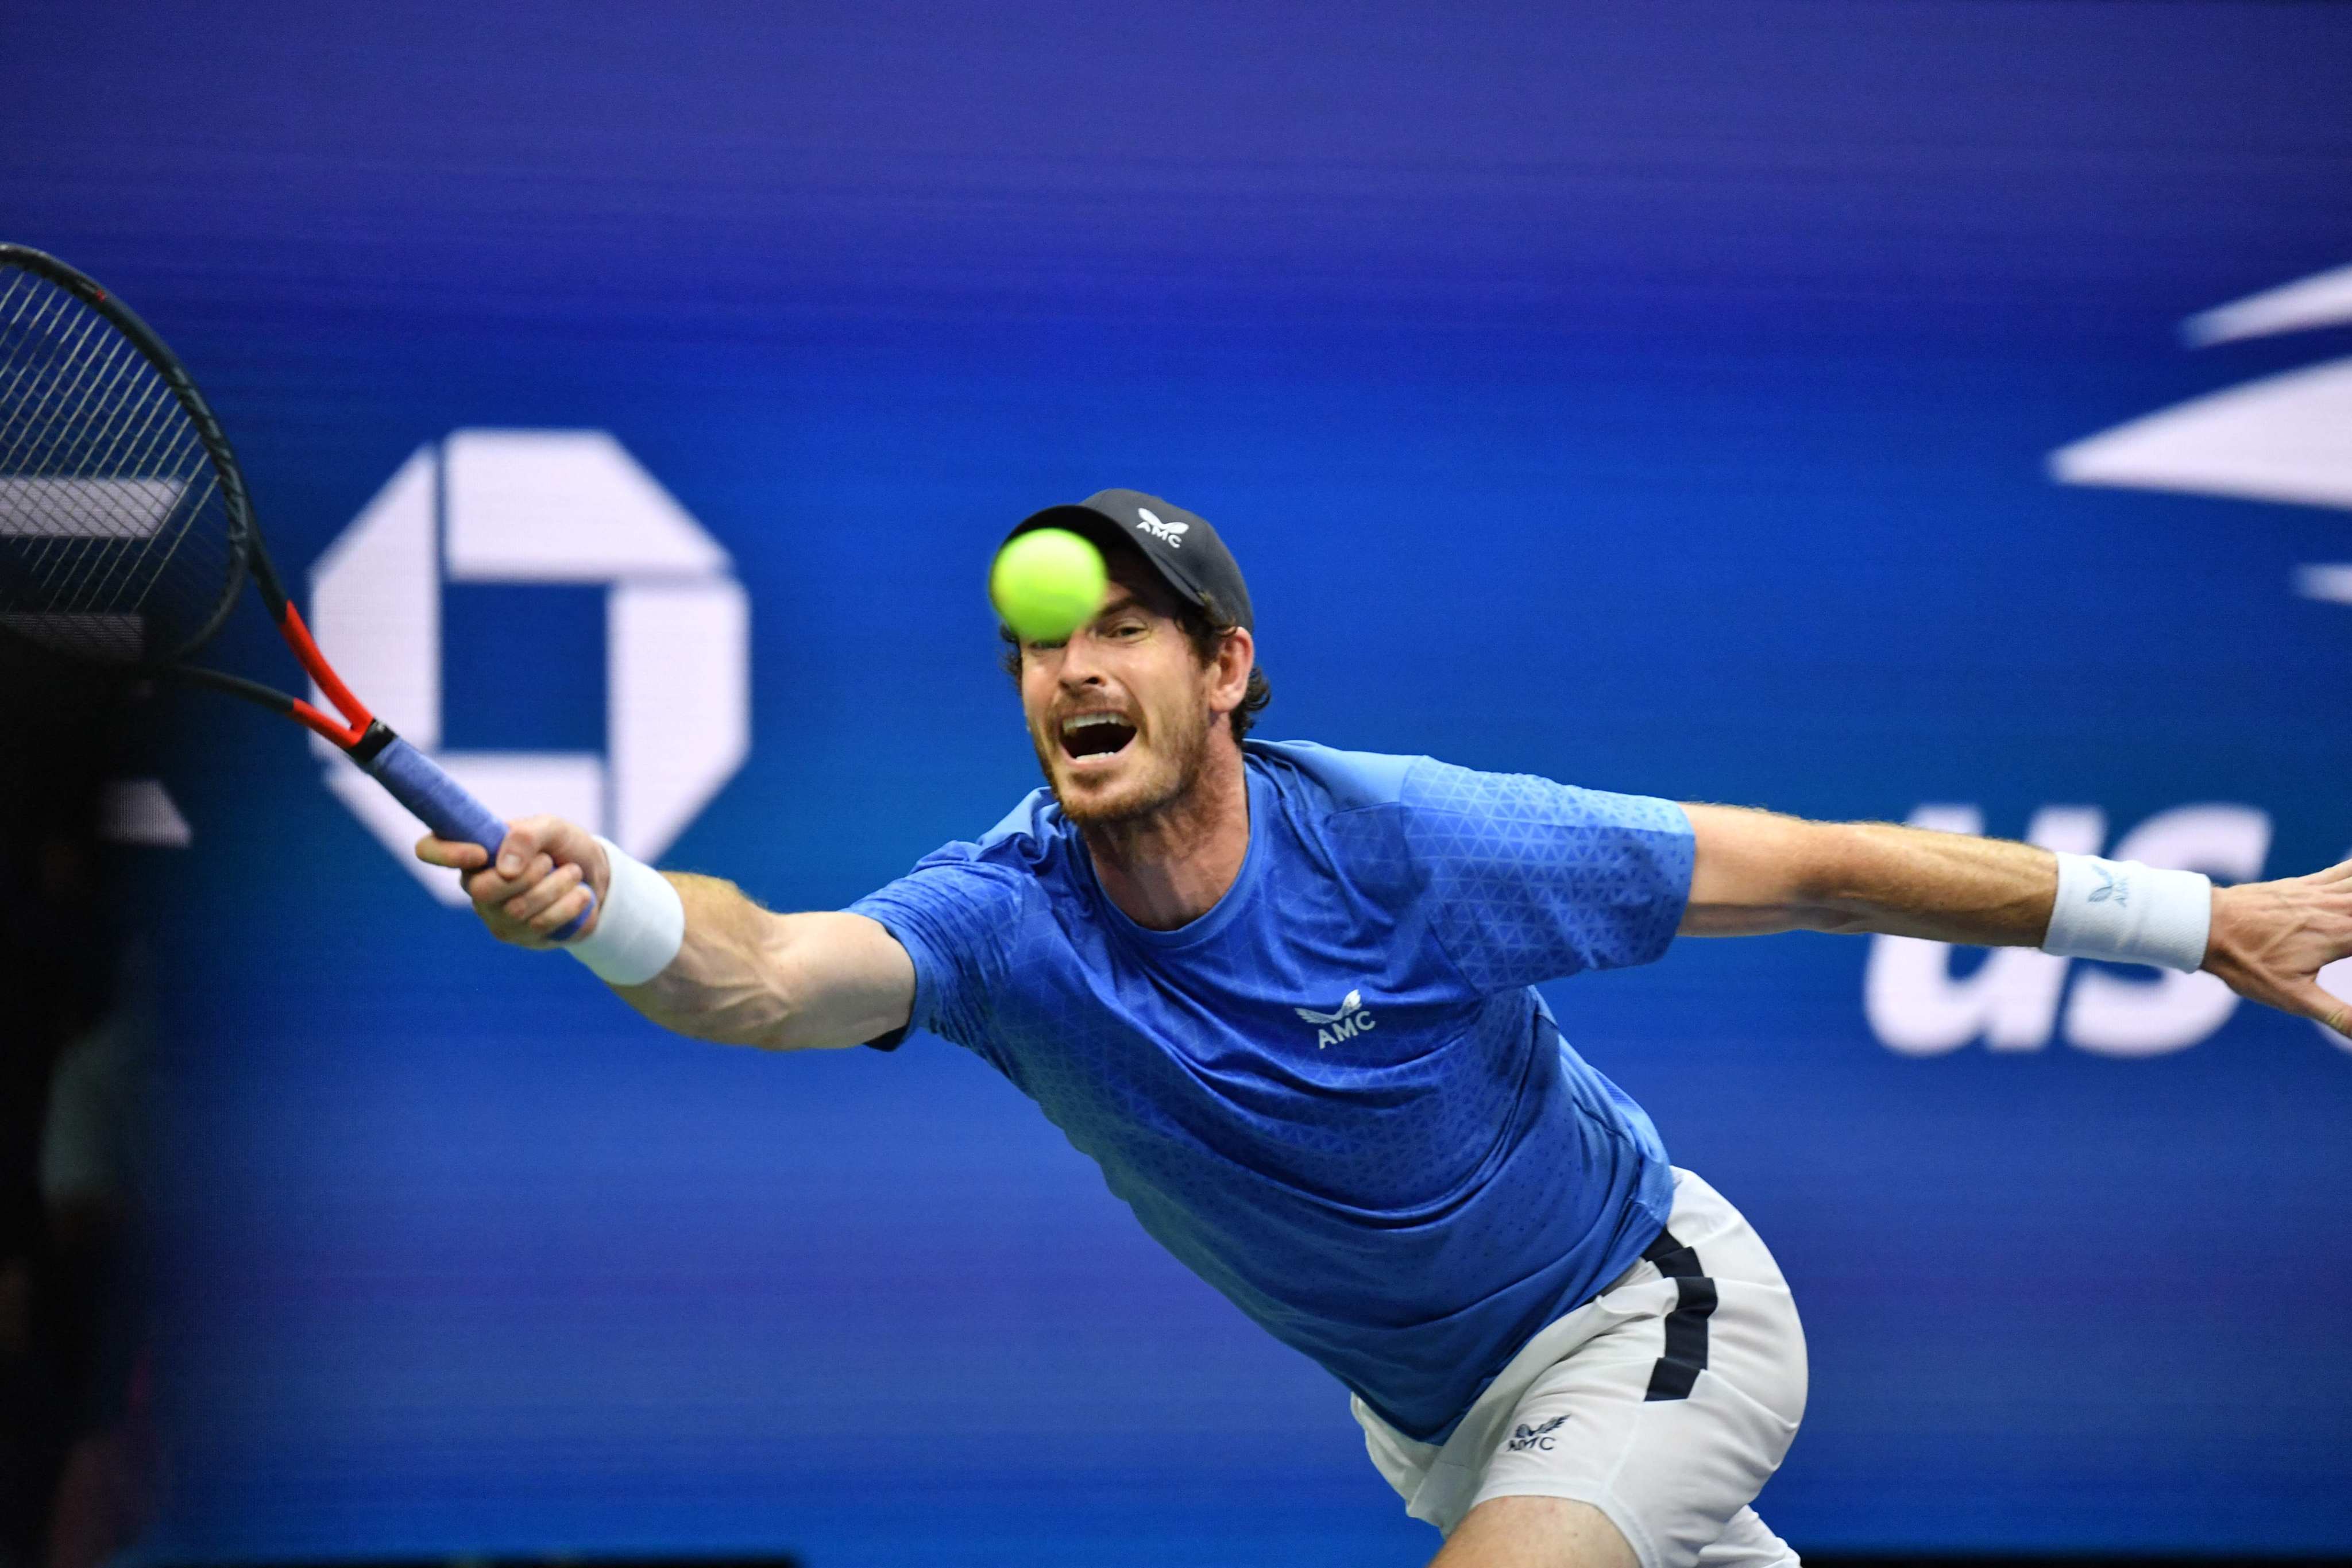 Britain’s Andy Murray in action at the recent US Open. Hip resurfacing allowed him to return to the professional tennis tour and play without pain. Photo: AFP